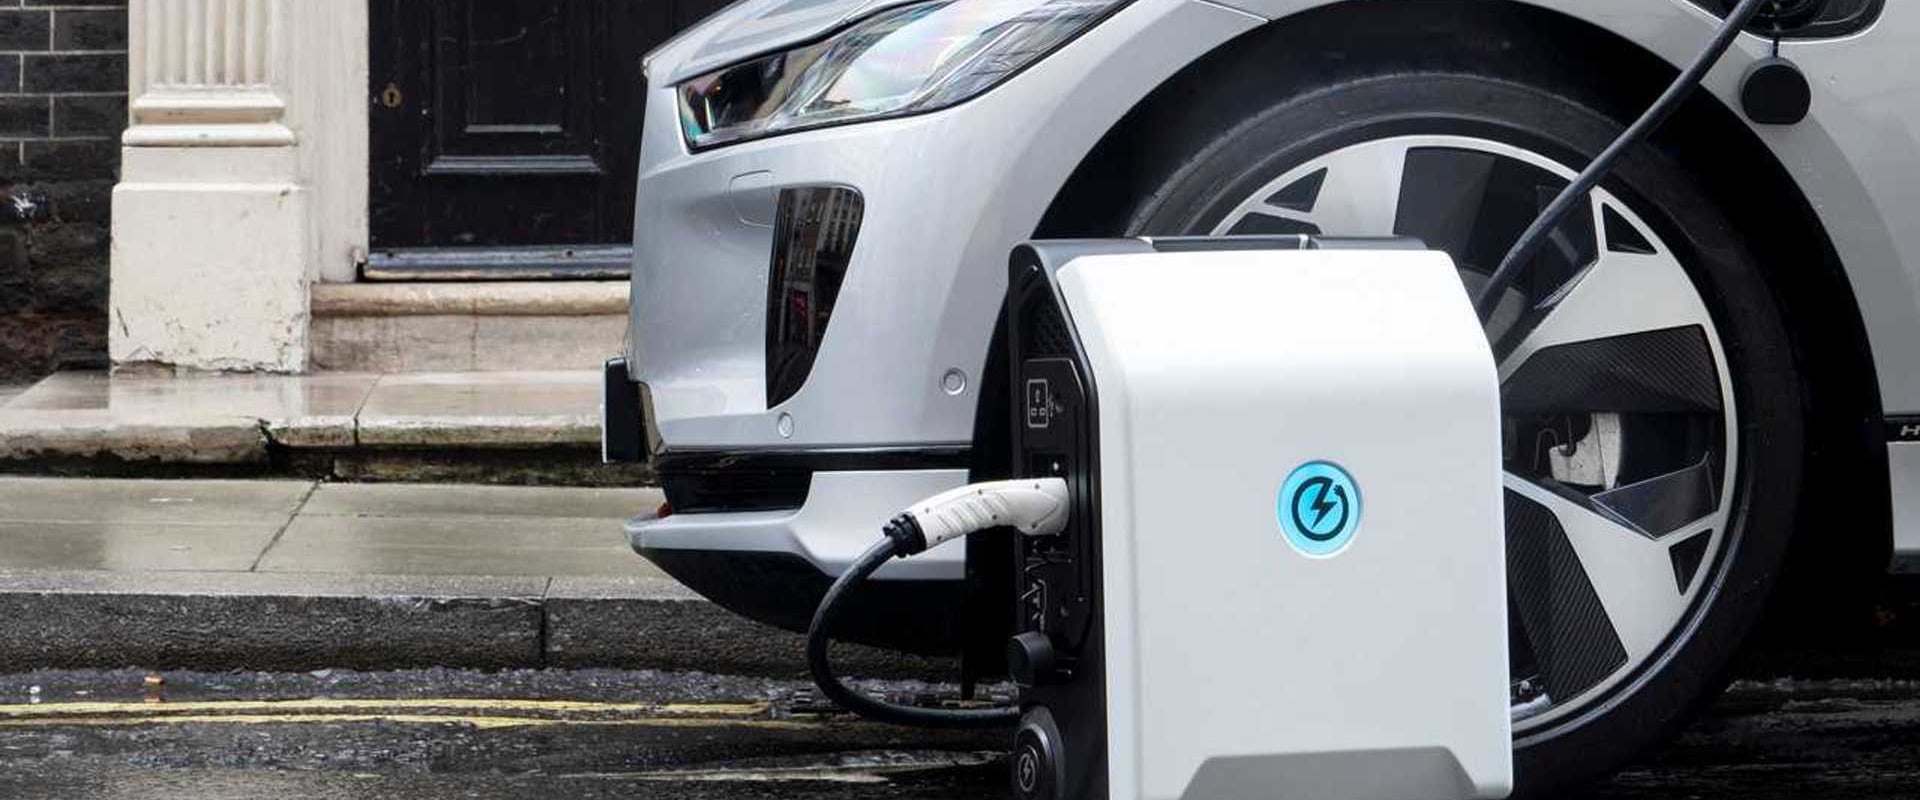 Portable Chargers for Electric Cars: What You Need to Know